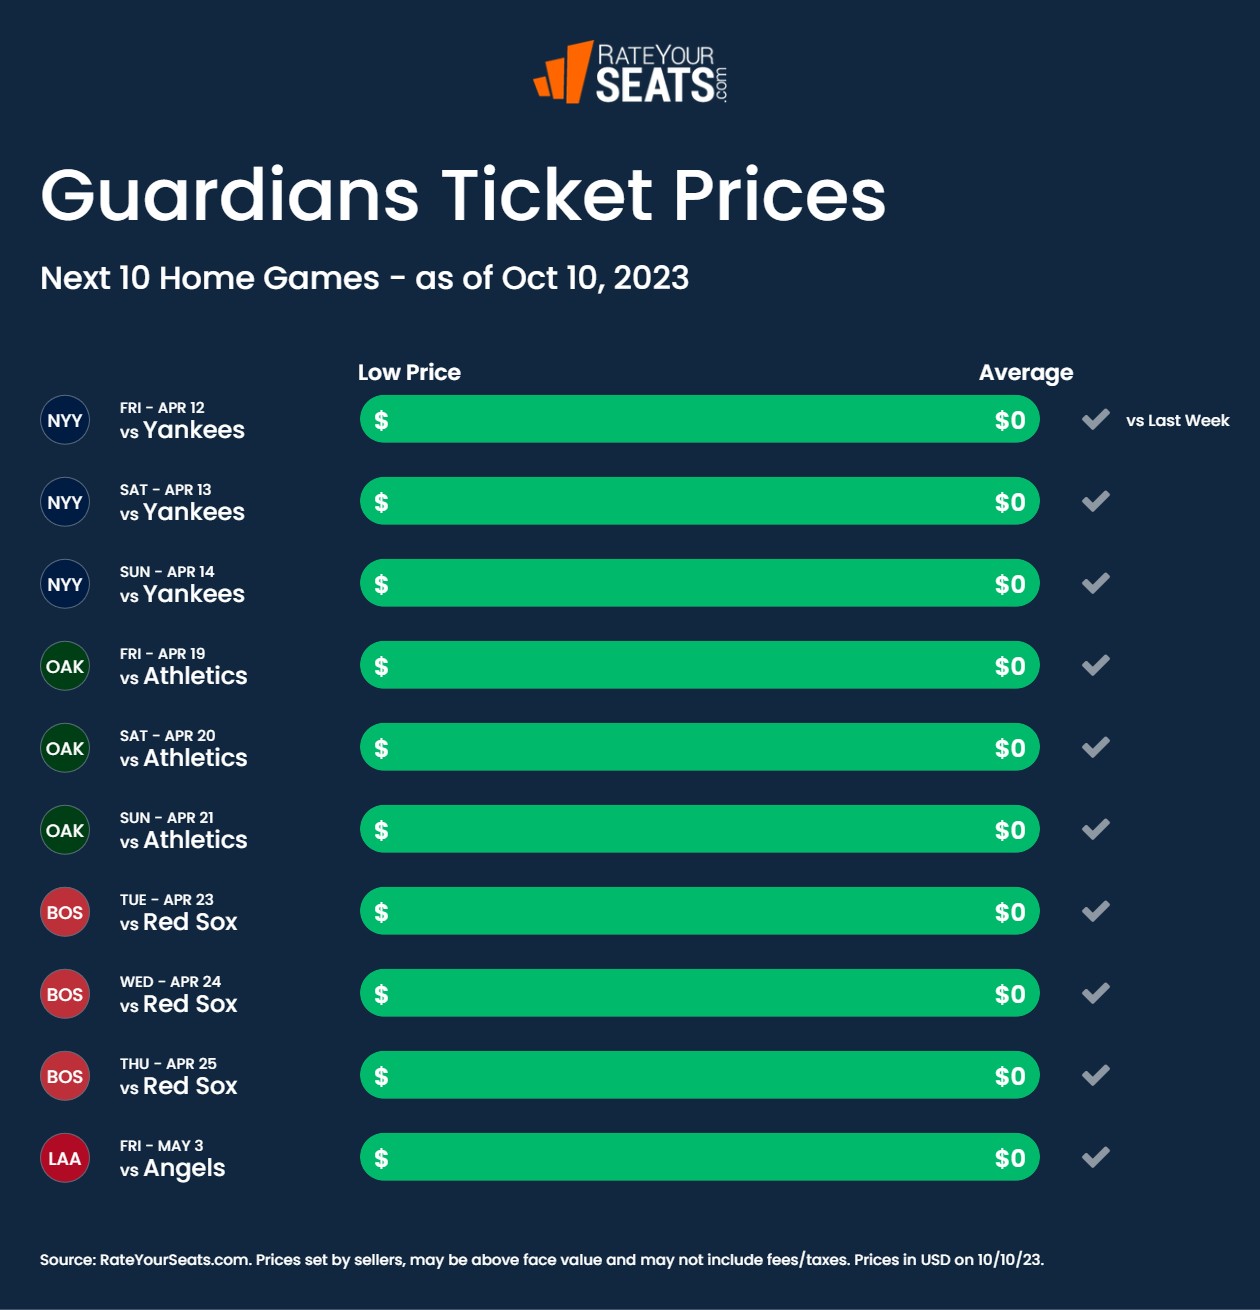 Guardians tickets pricing week of October 10 2023